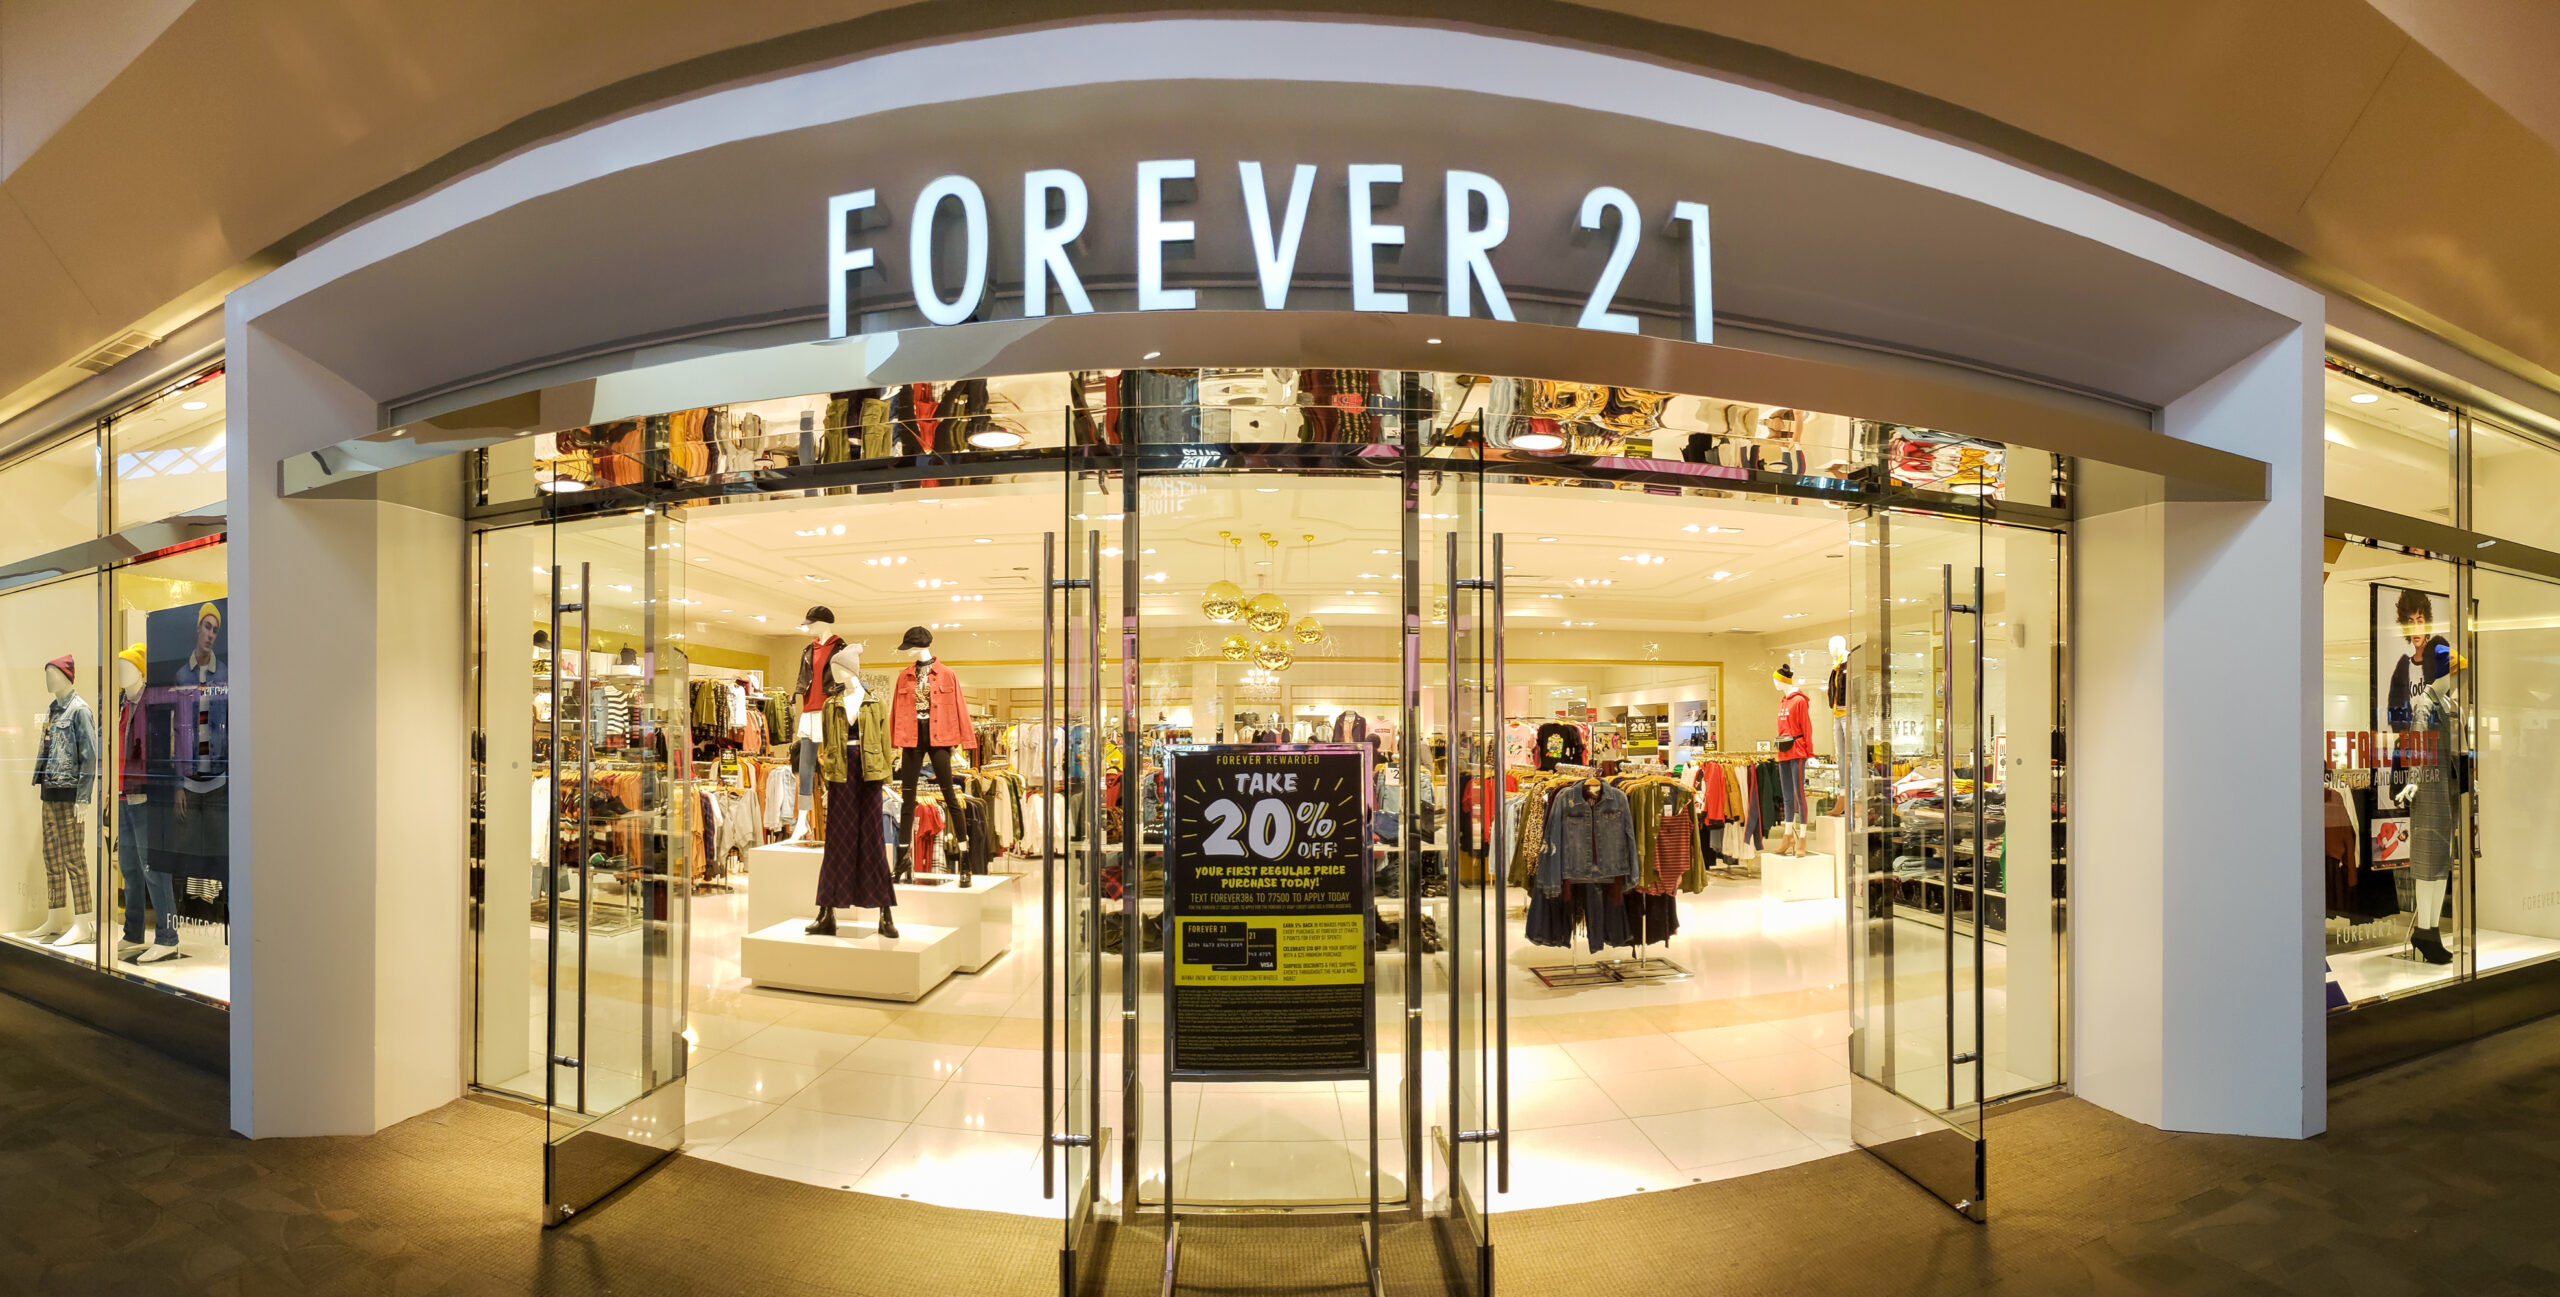 Data breach: Forever 21 store entrance compromised by cybercriminals.